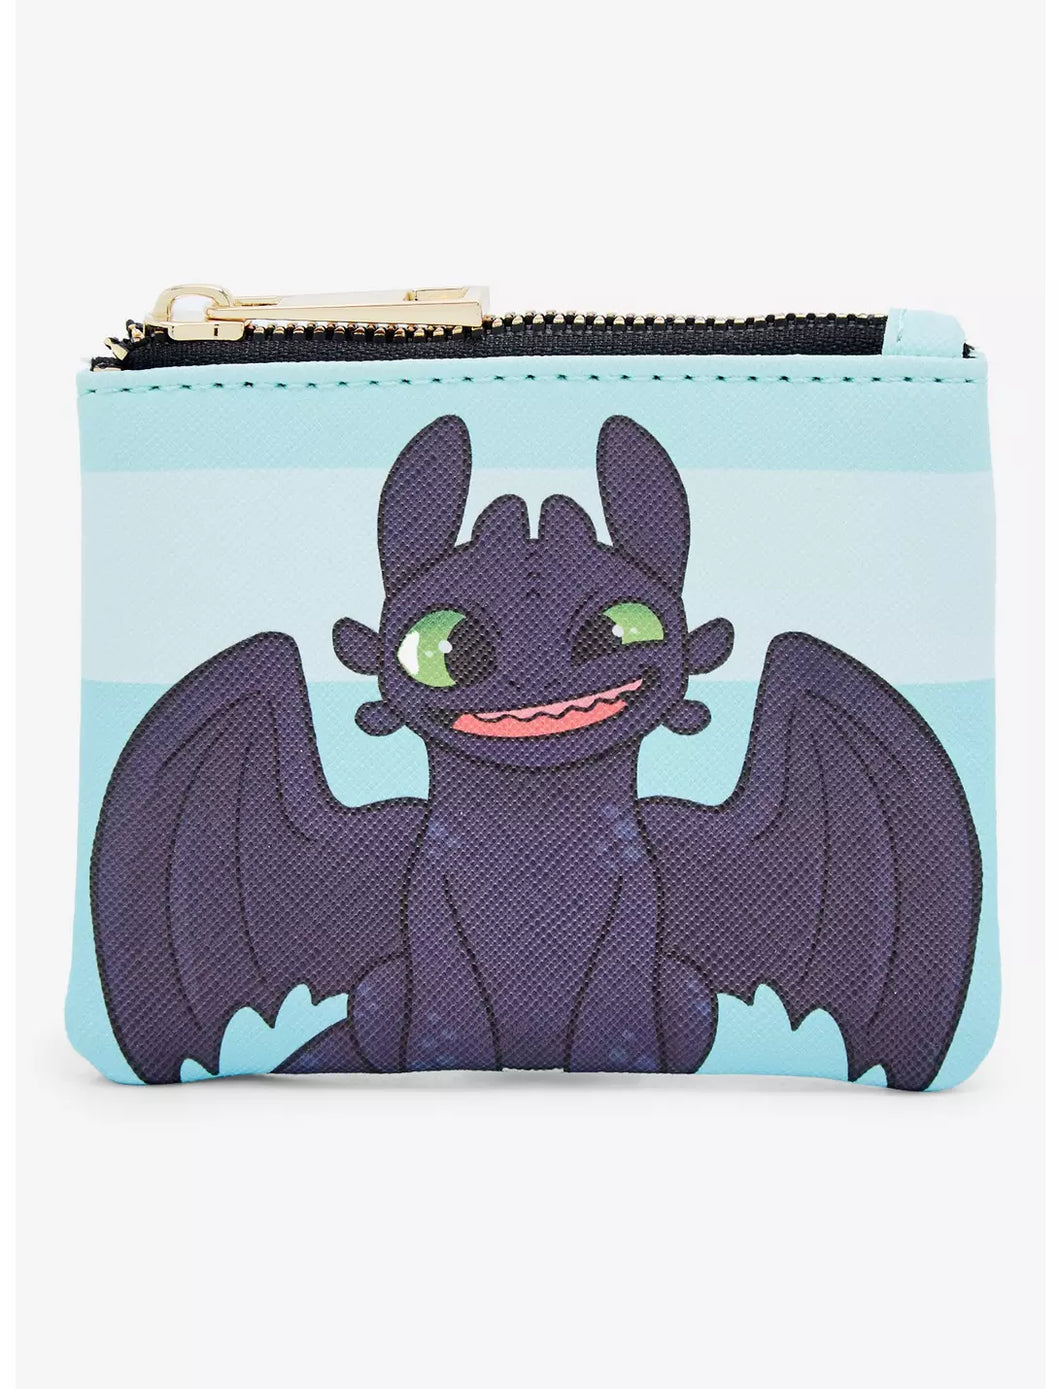 How to Train Your Dragon Wallet Toothless Smile Bioworld